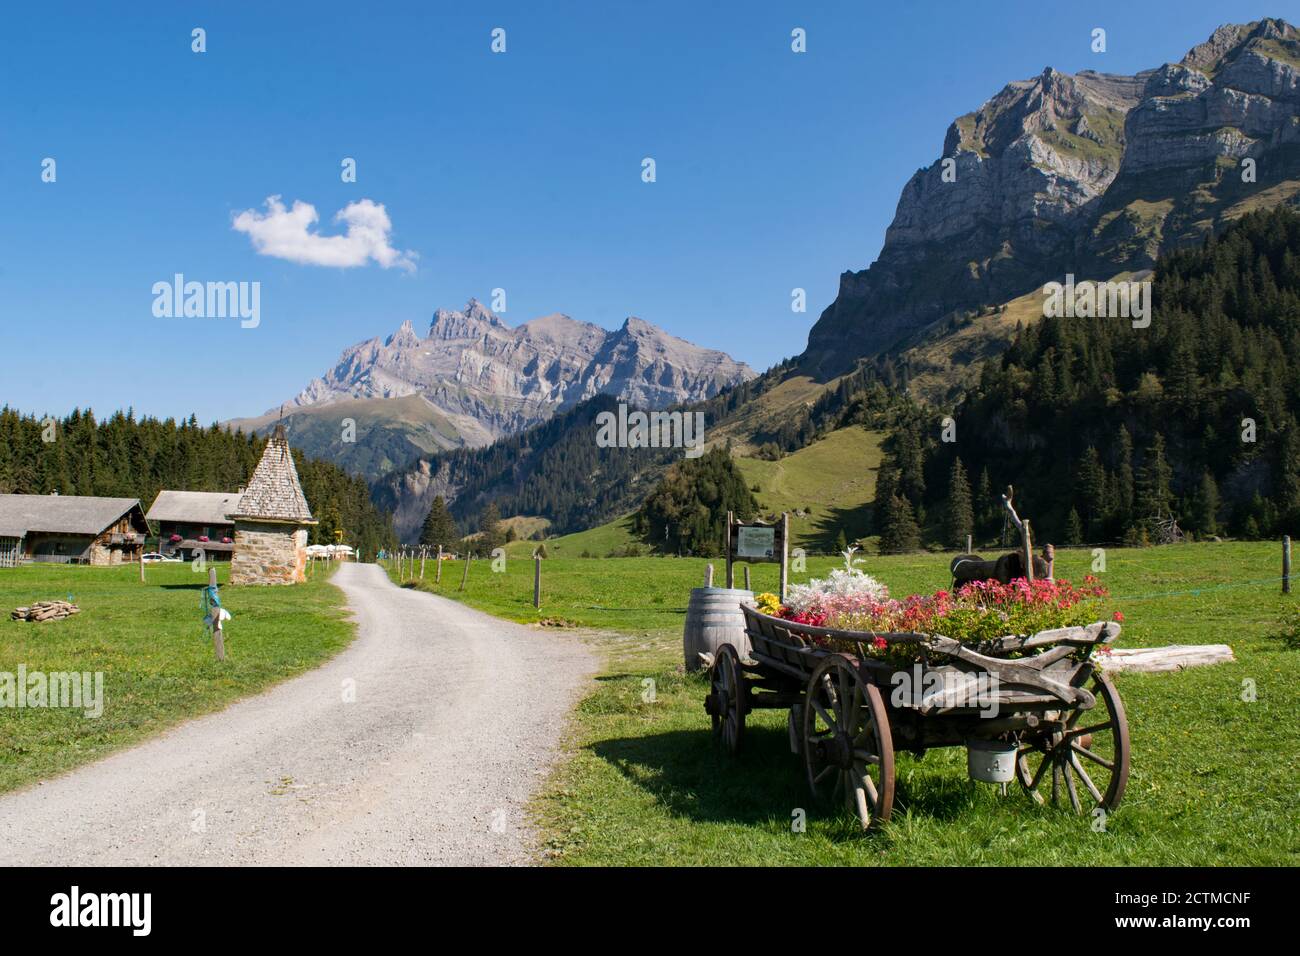 Alpine view with restaurants and flower cart Stock Photo